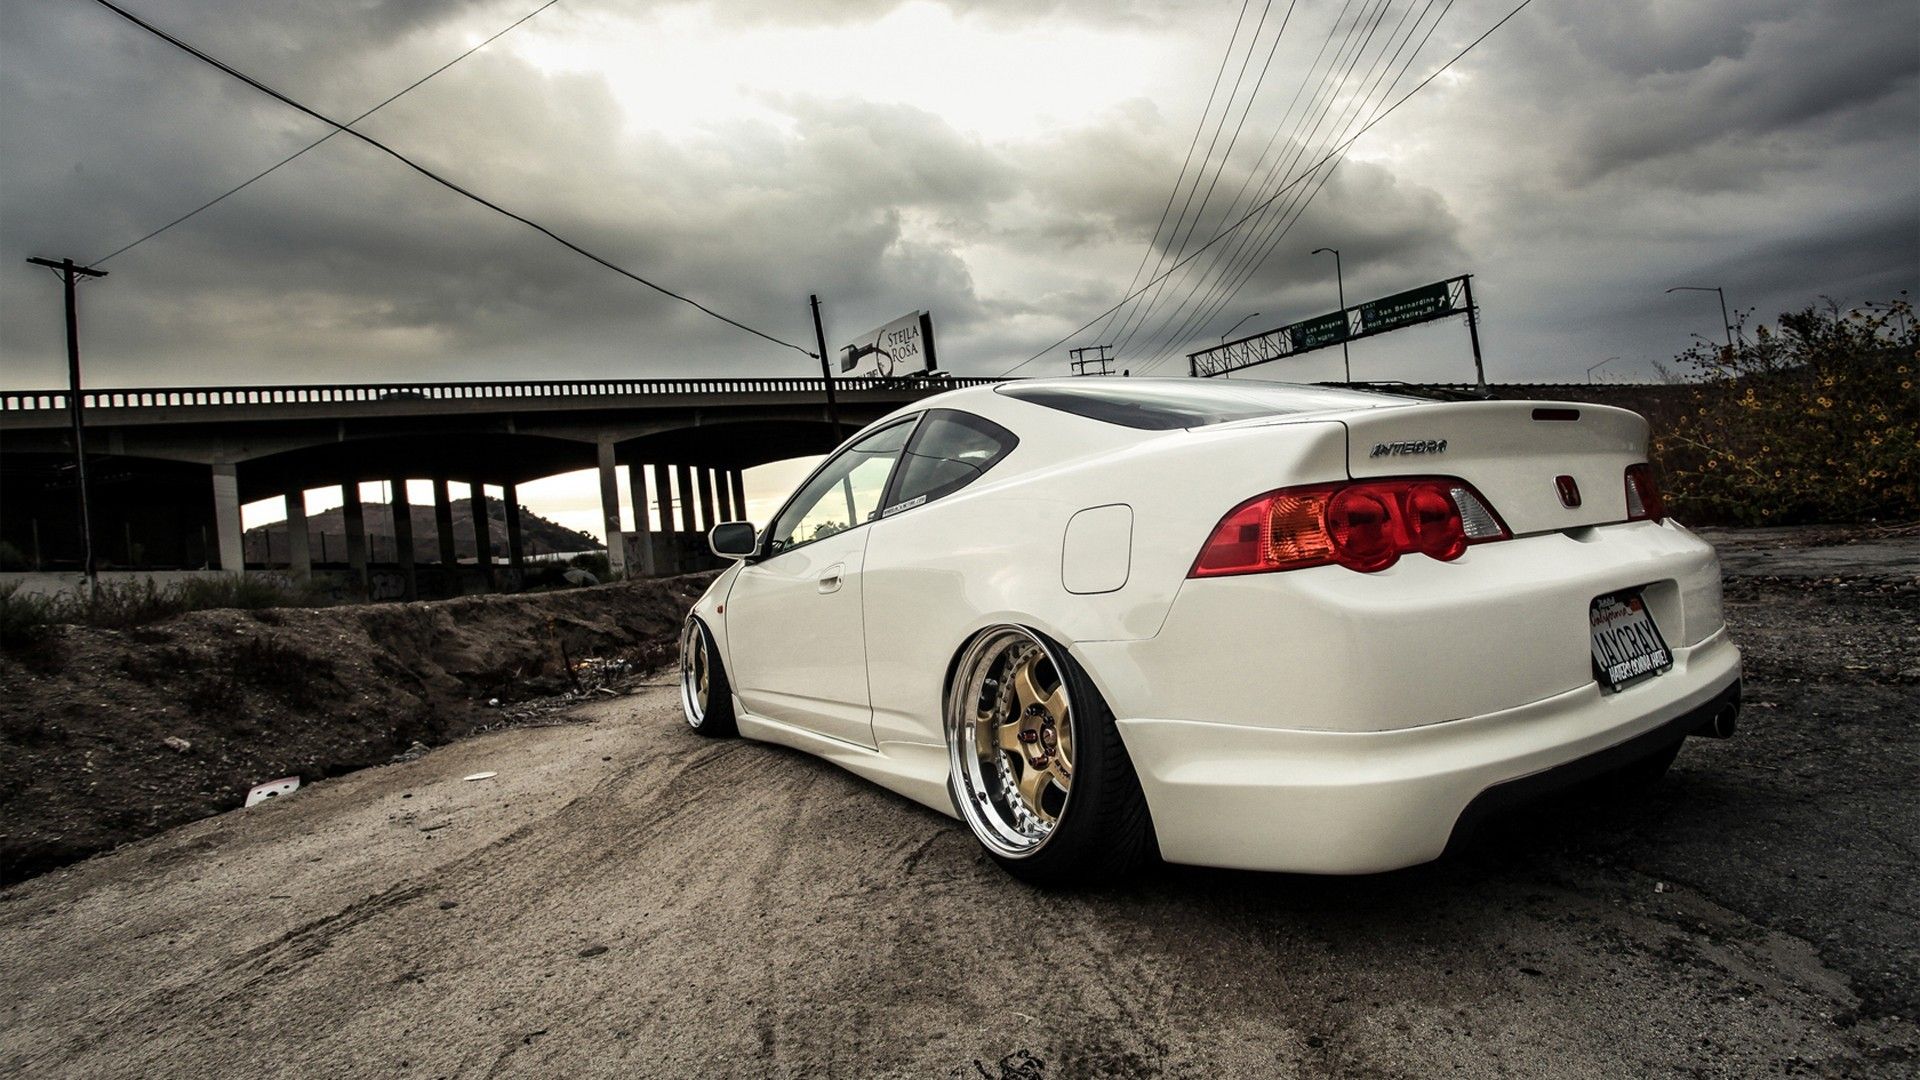 Image For Acura Rsx Background Places To Visit Honda